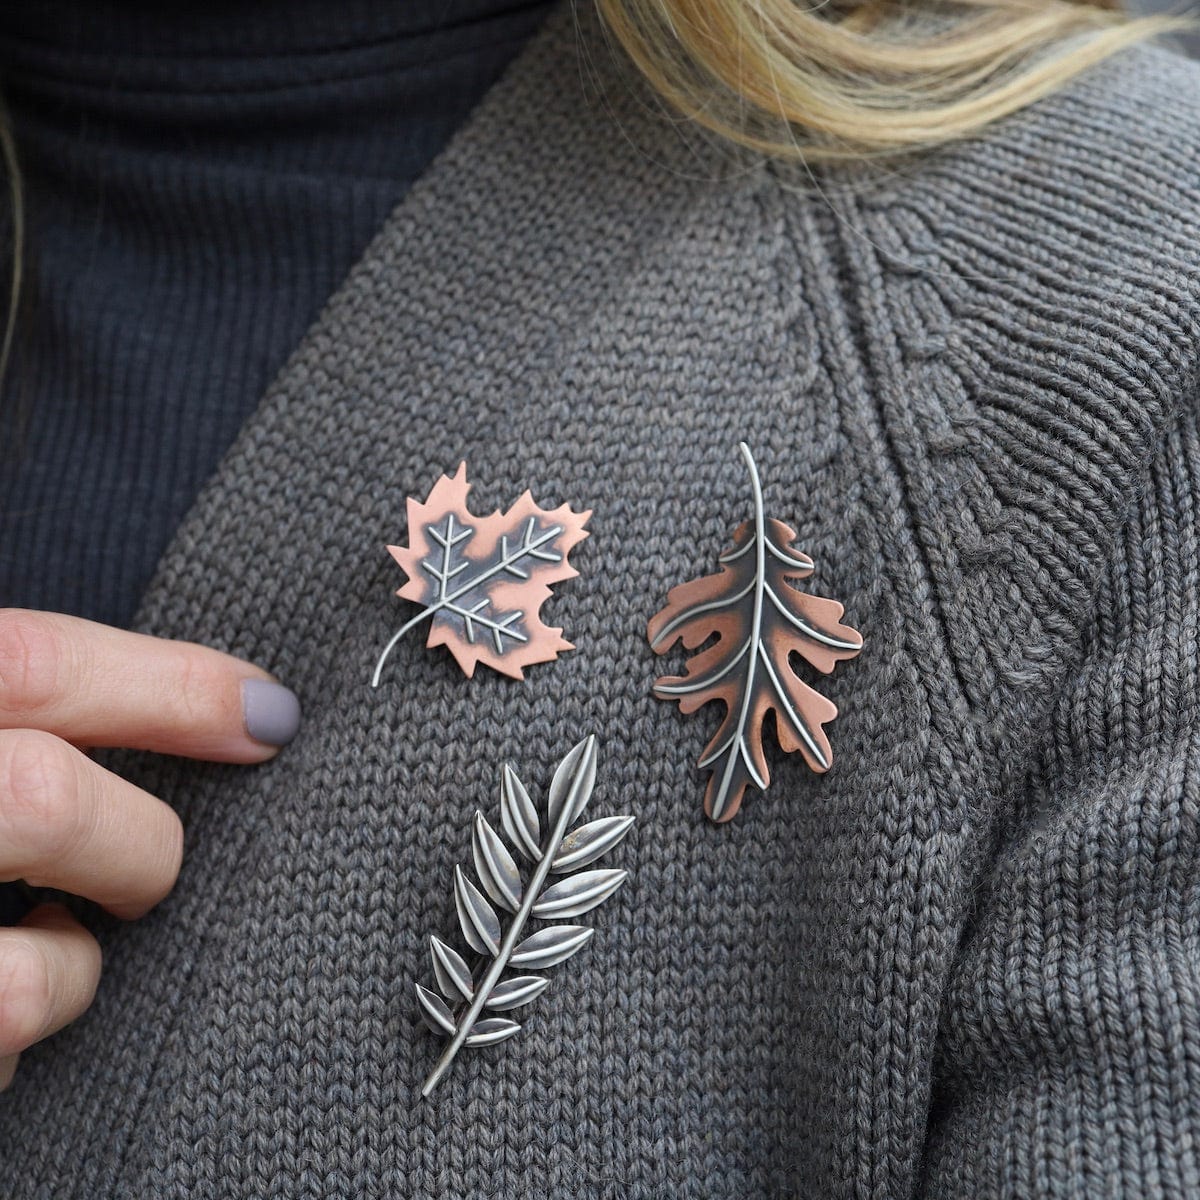 PIN Copper & Sterling Silver Small Maple Leaf Pin